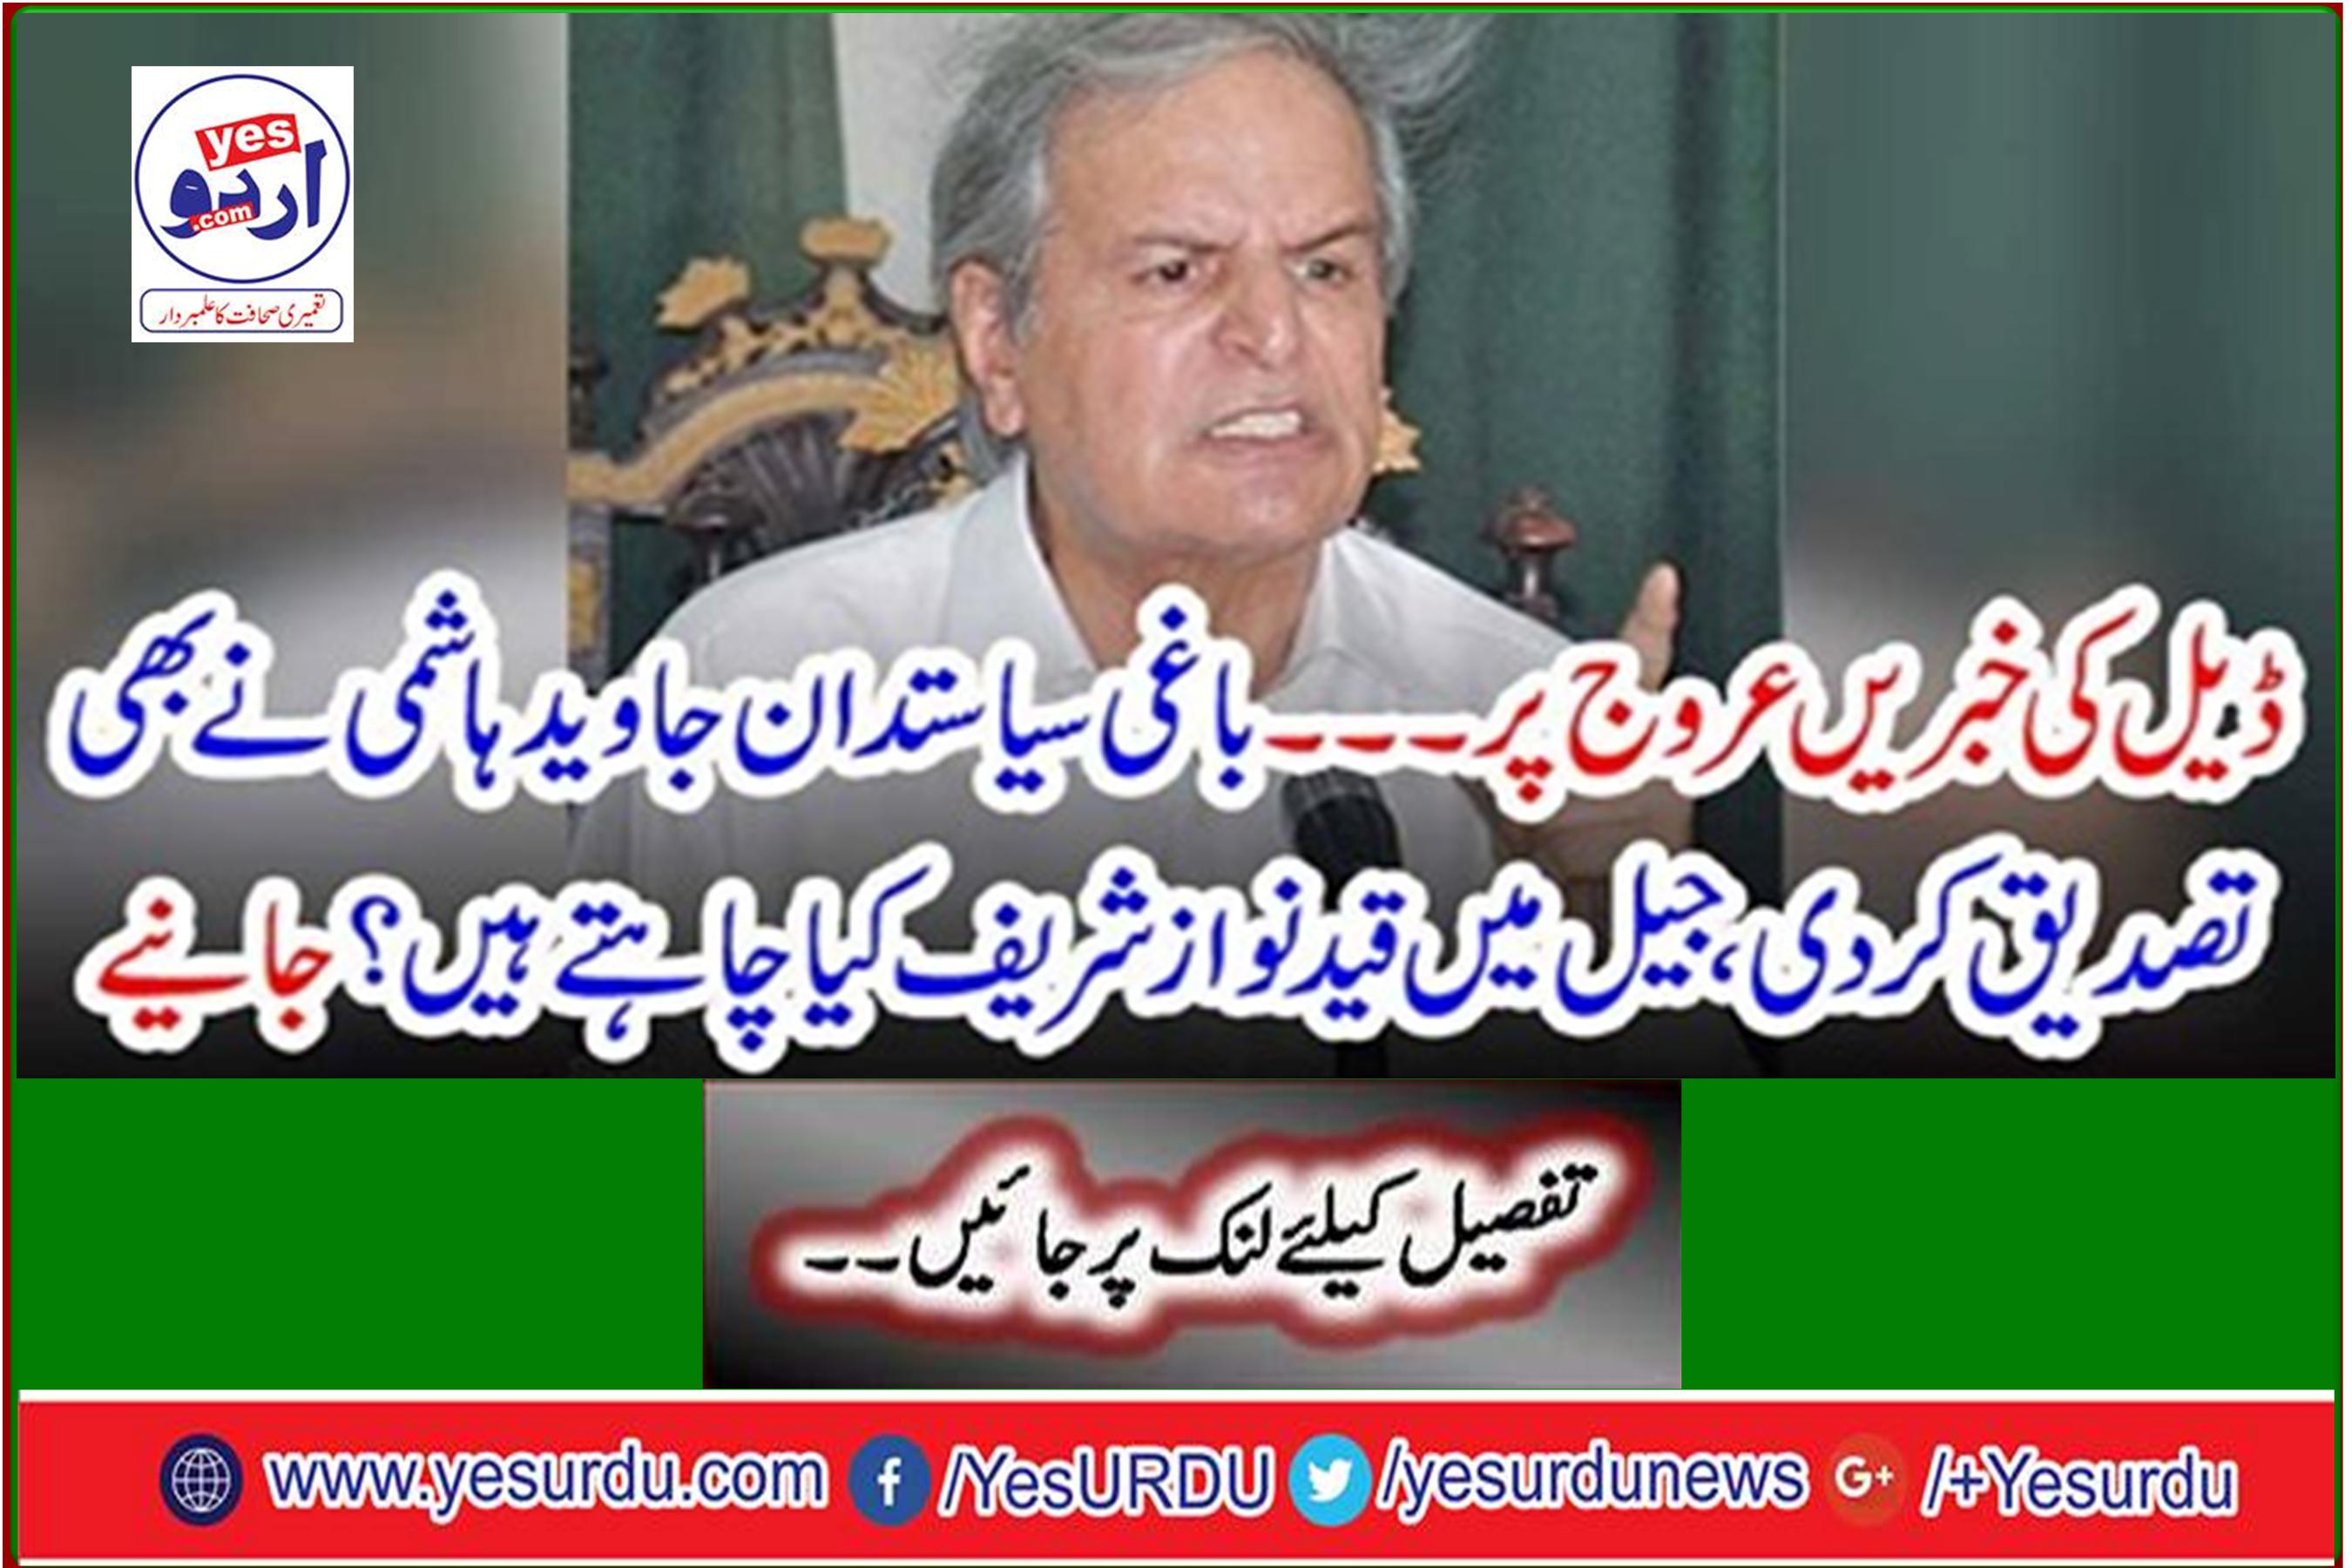 Rebel politician Javed Hashmi also confirmed, what do you want Sharif to do in jail?